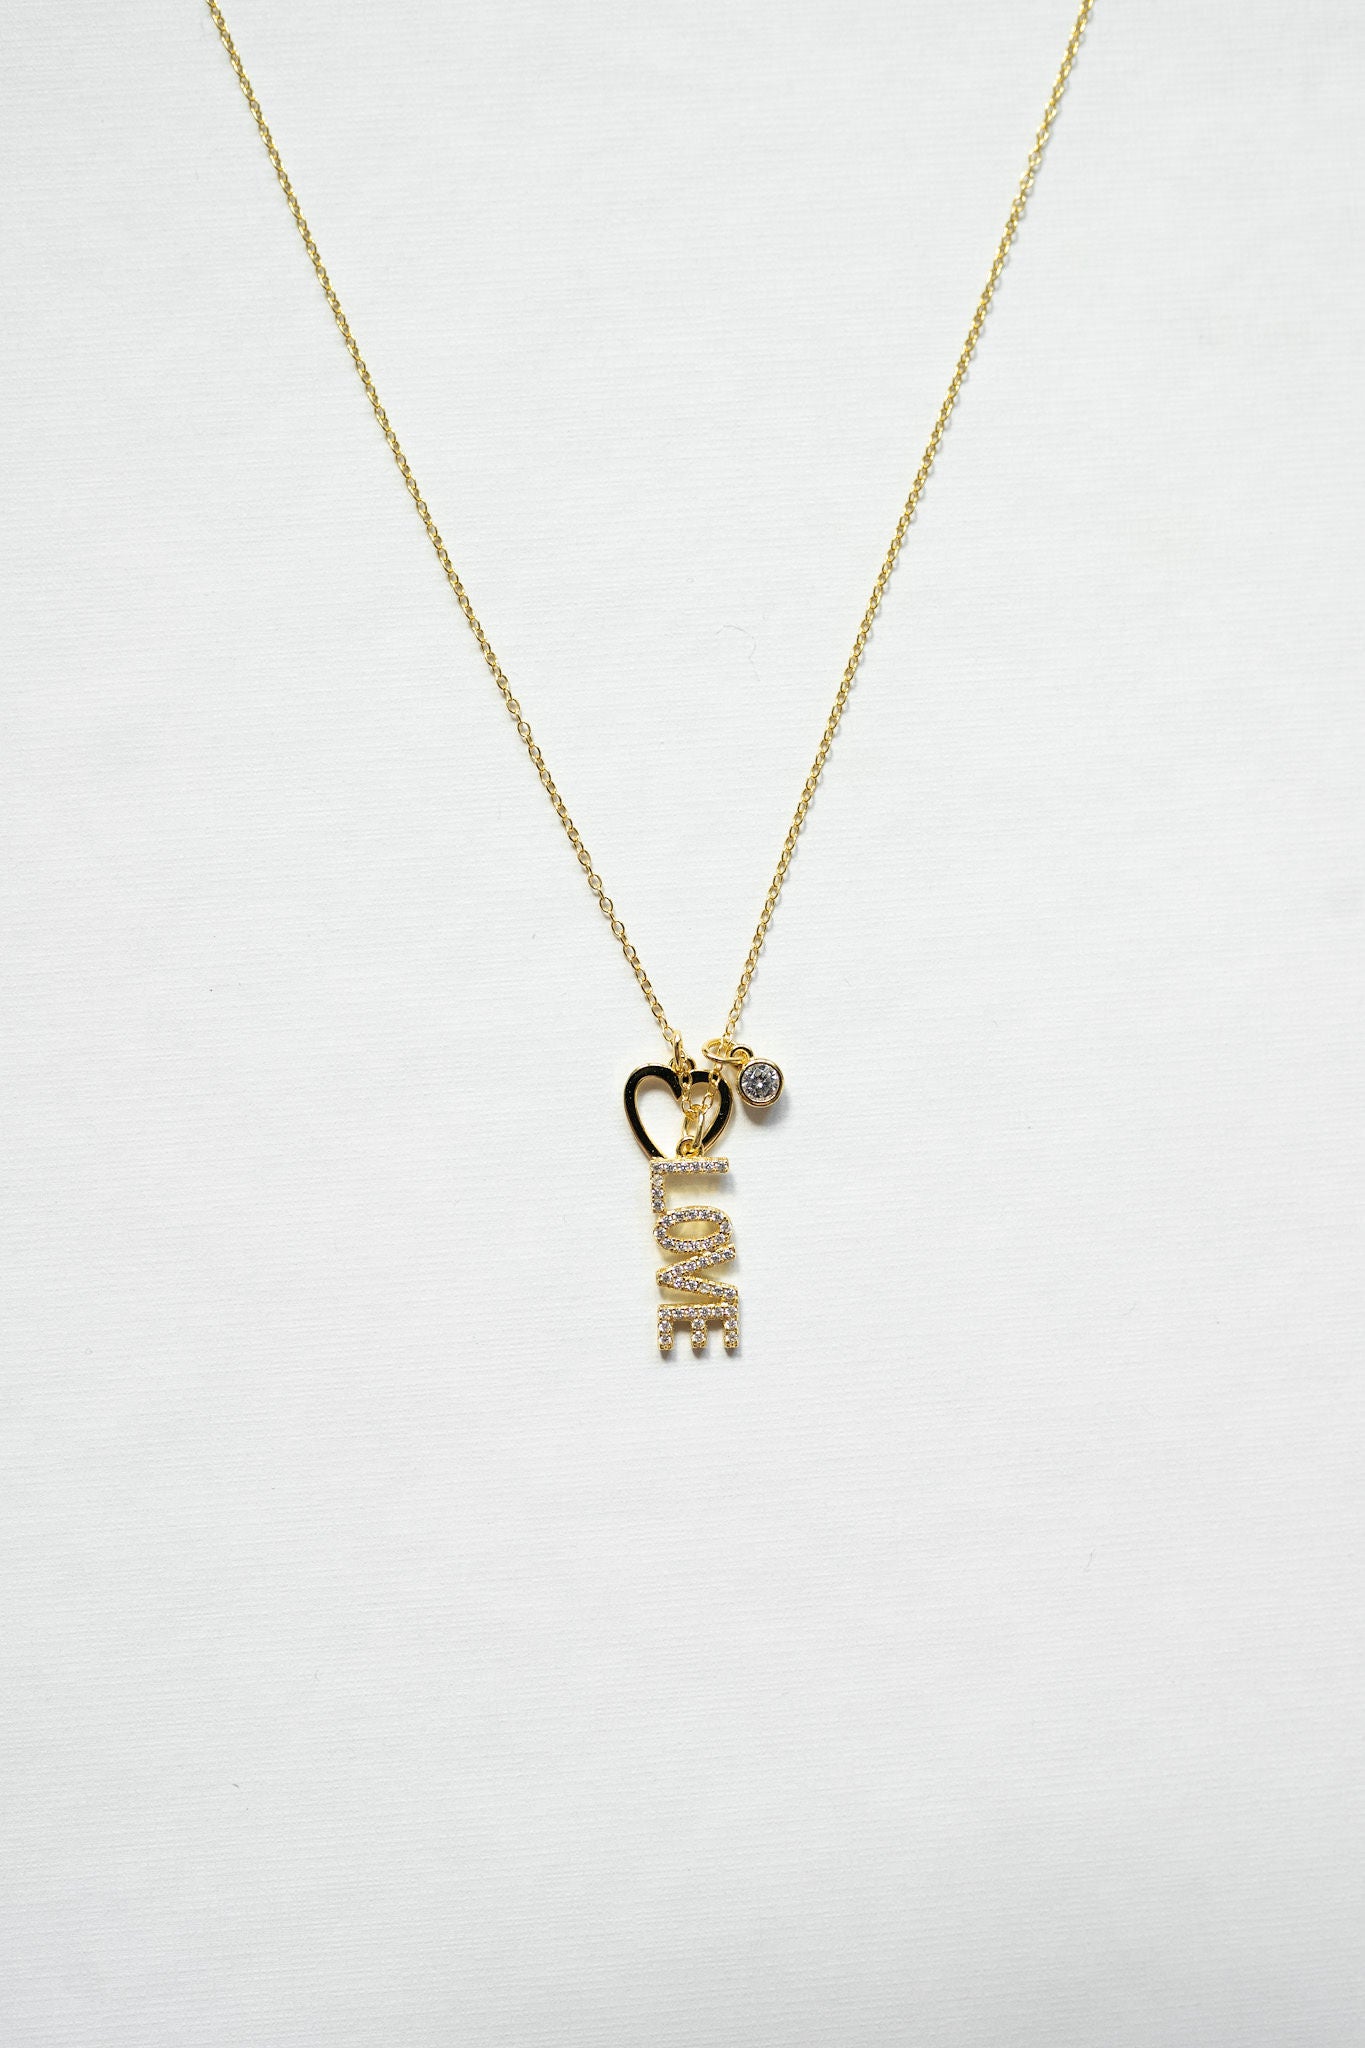 Love Sterling Silver Affirmation Necklace – I AM LOVE PROJECT